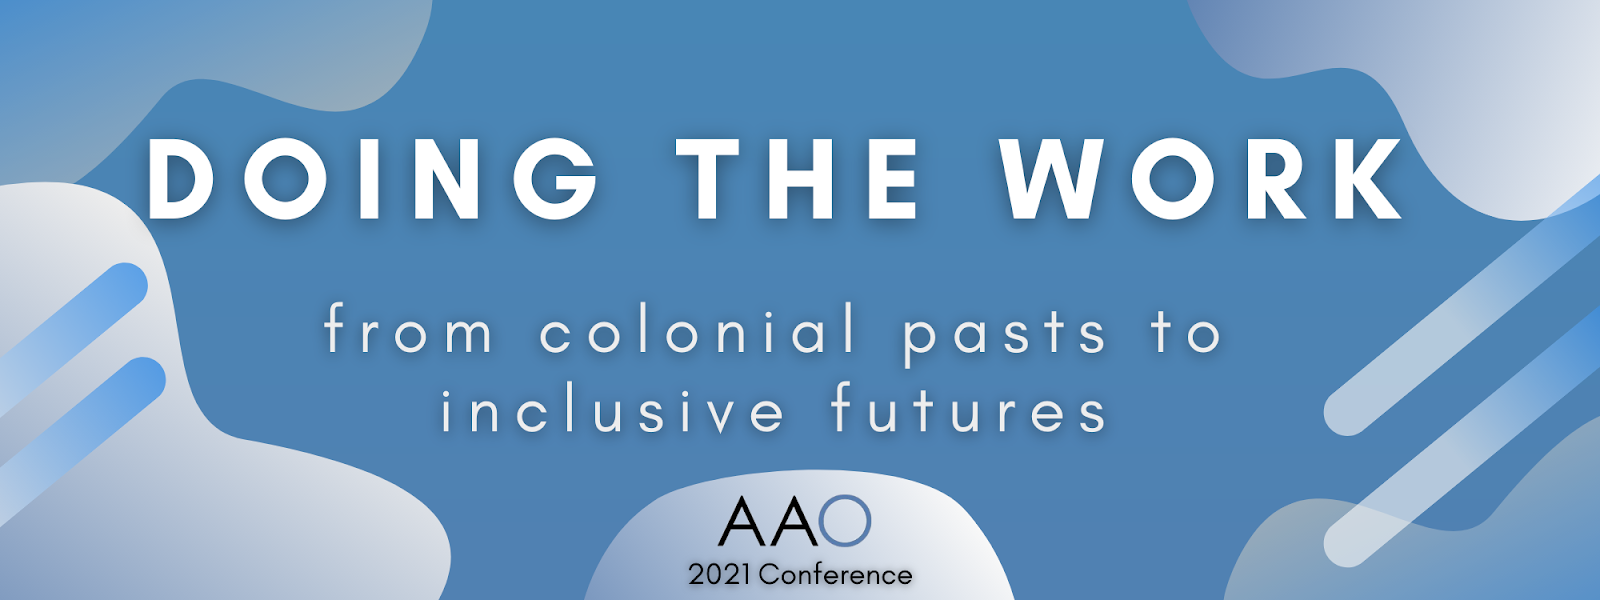 AAO Conference banner that states: Doing the work. From colonial pasts to inclusive futures.